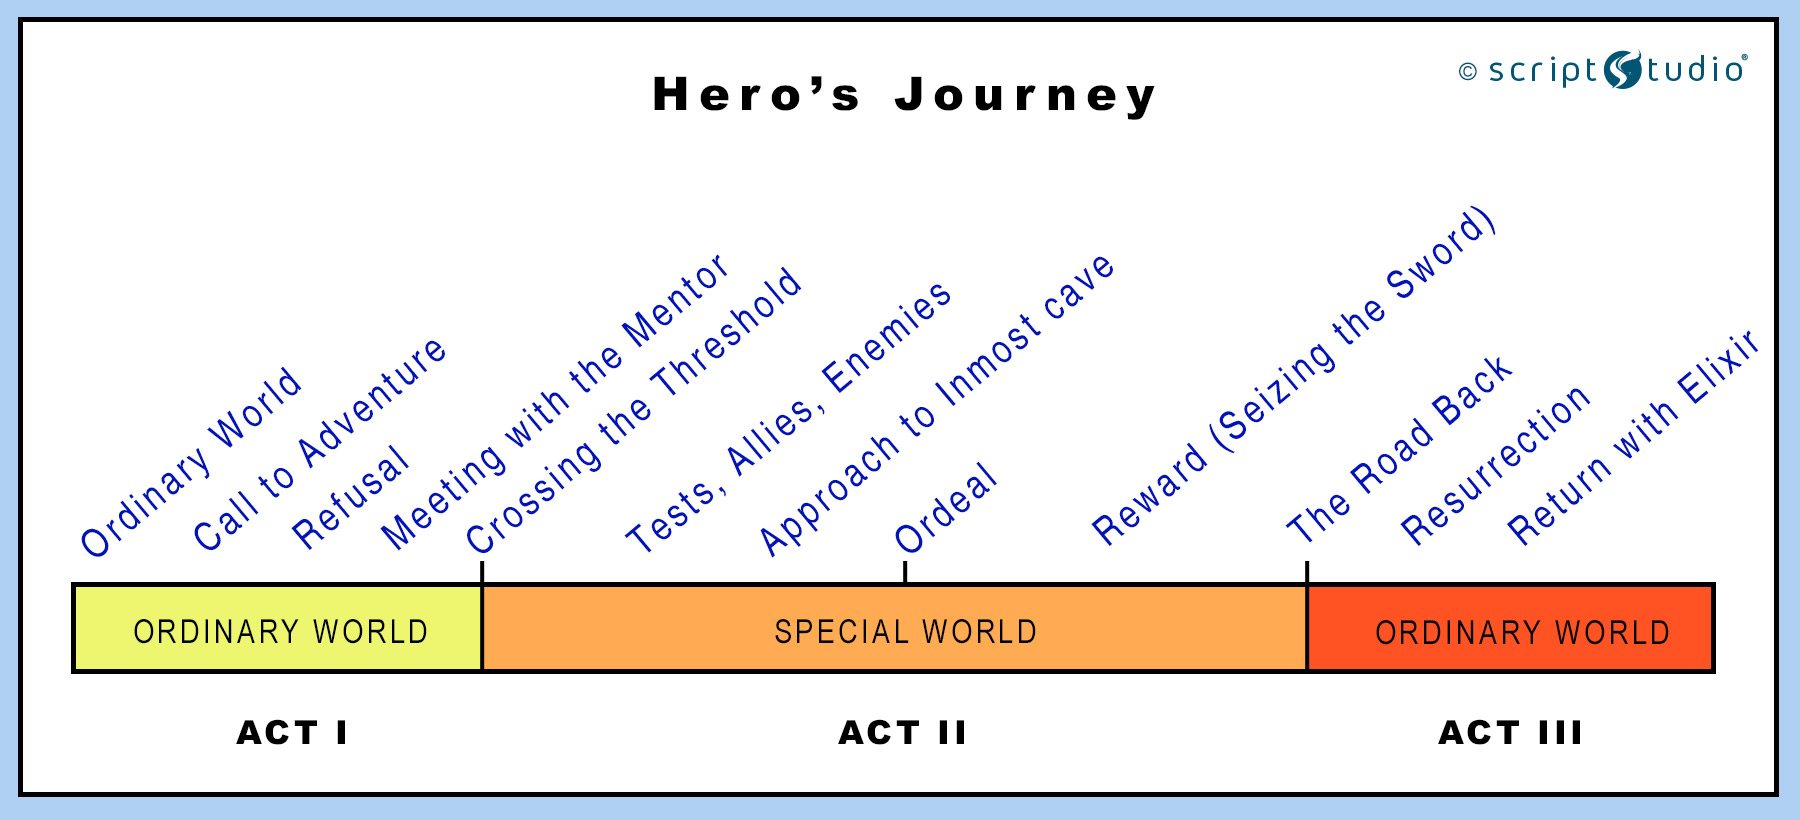 Hero's Journey Mythic Structure